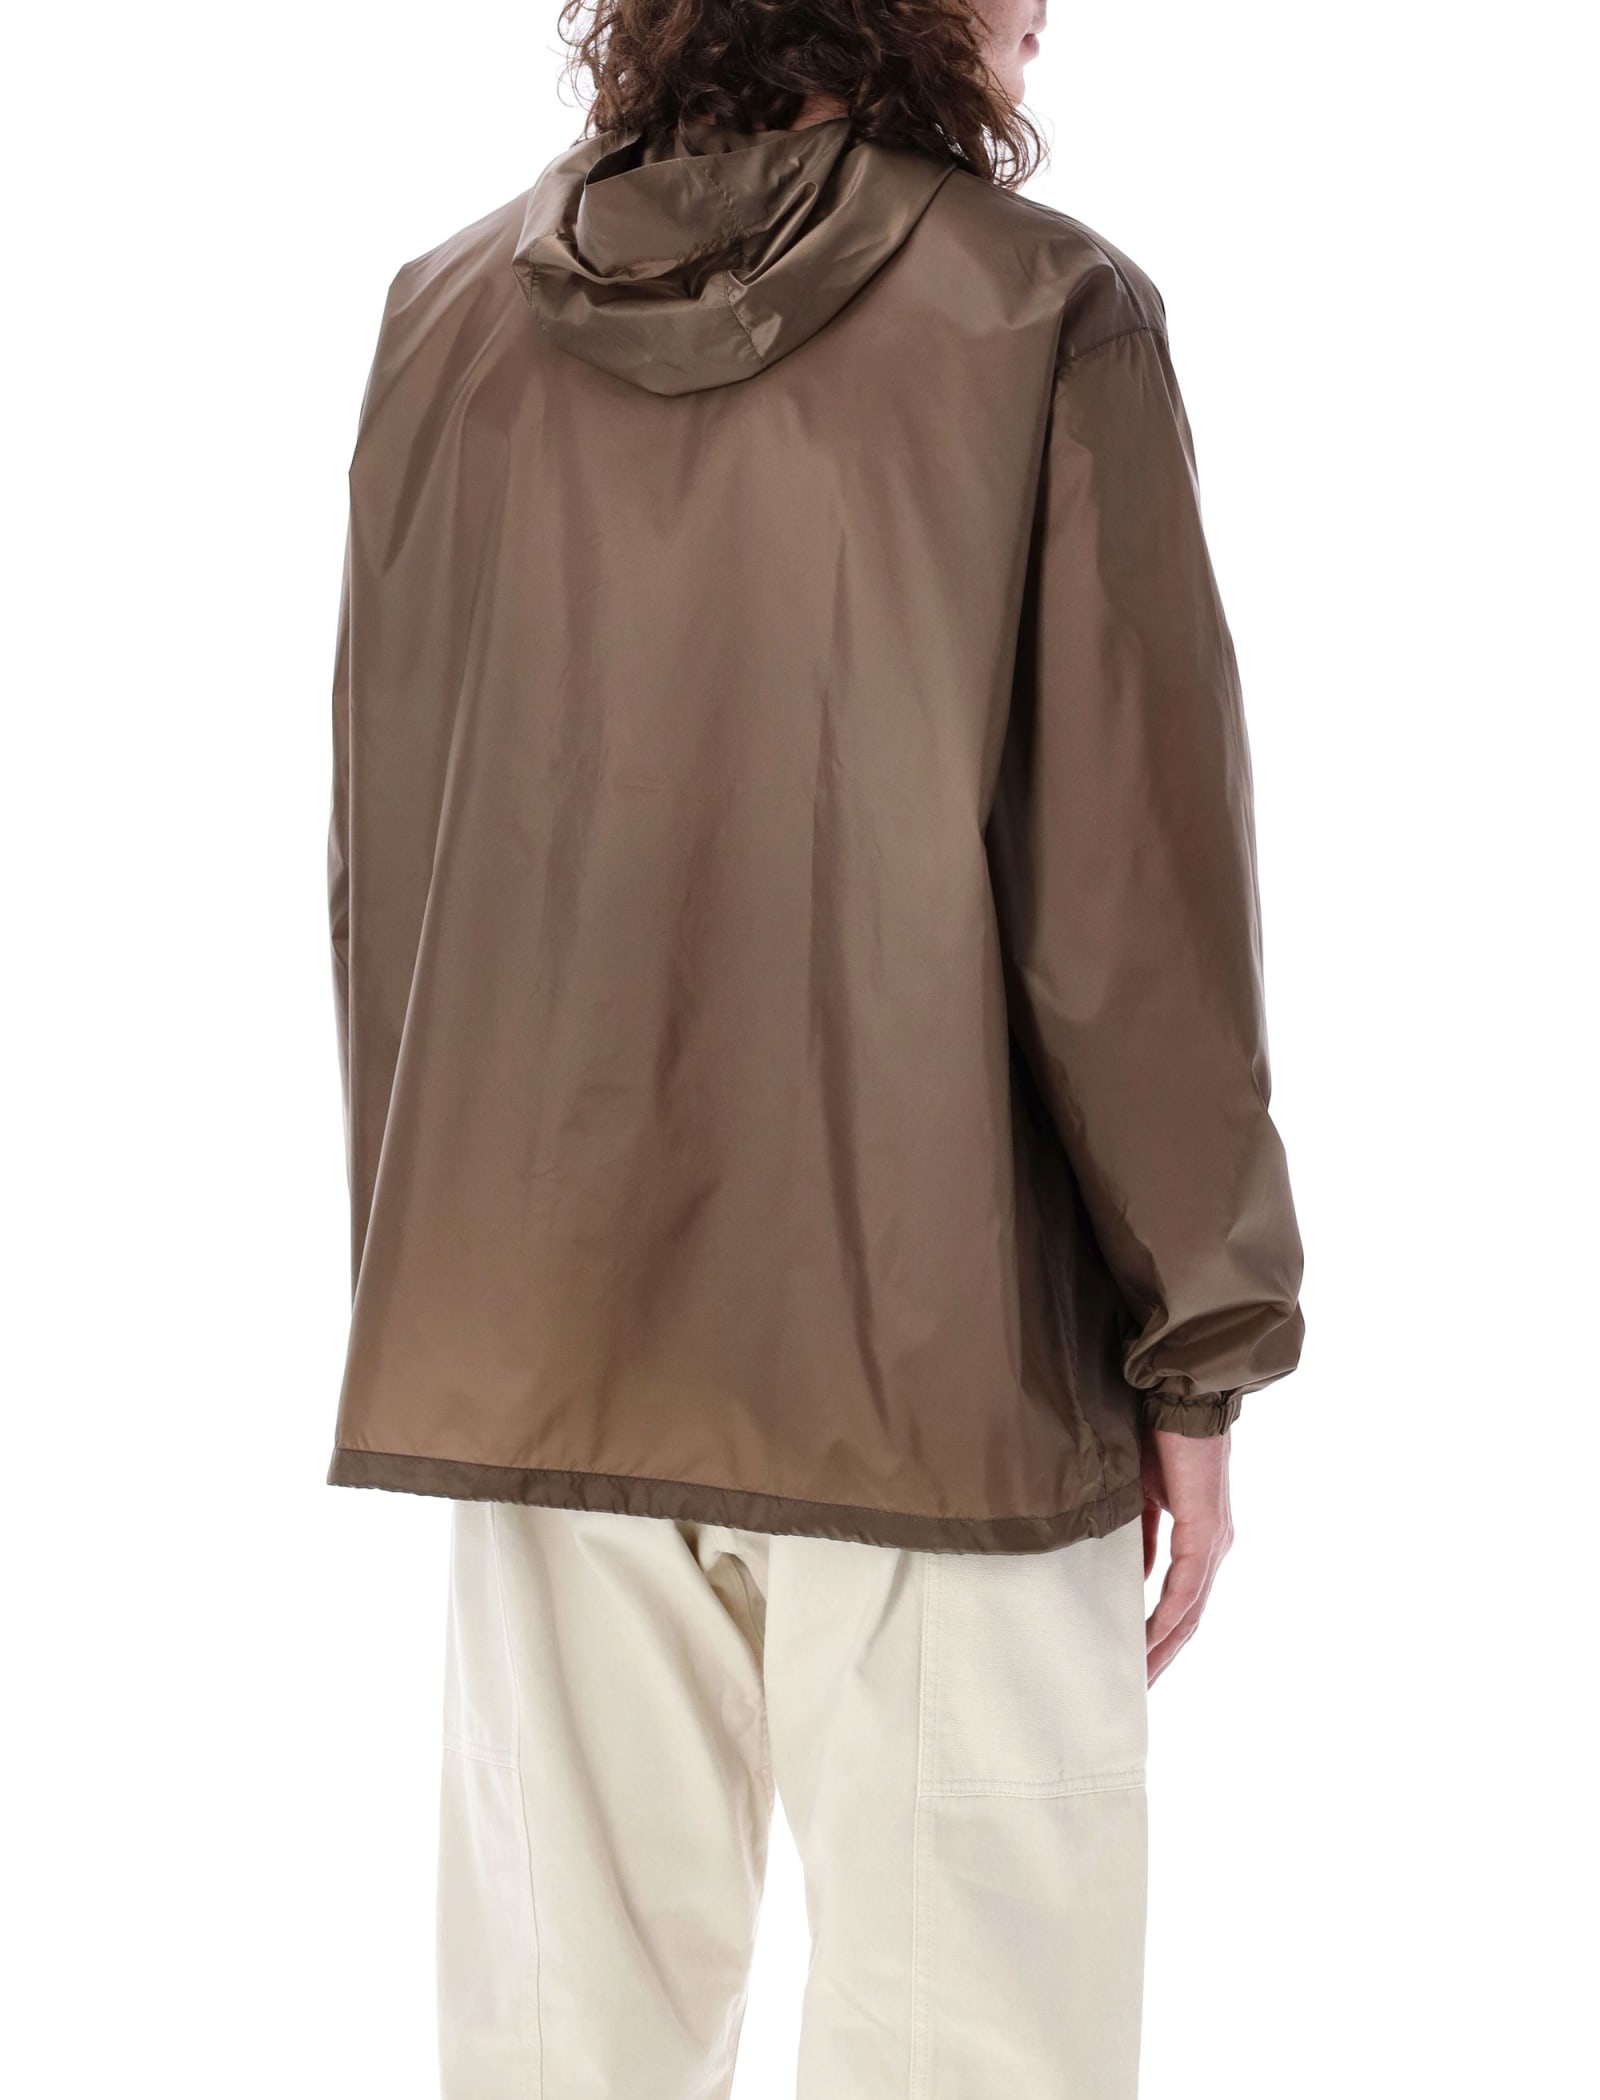 Shop Gramicci Packable Windbreaker Jacket In Taupe